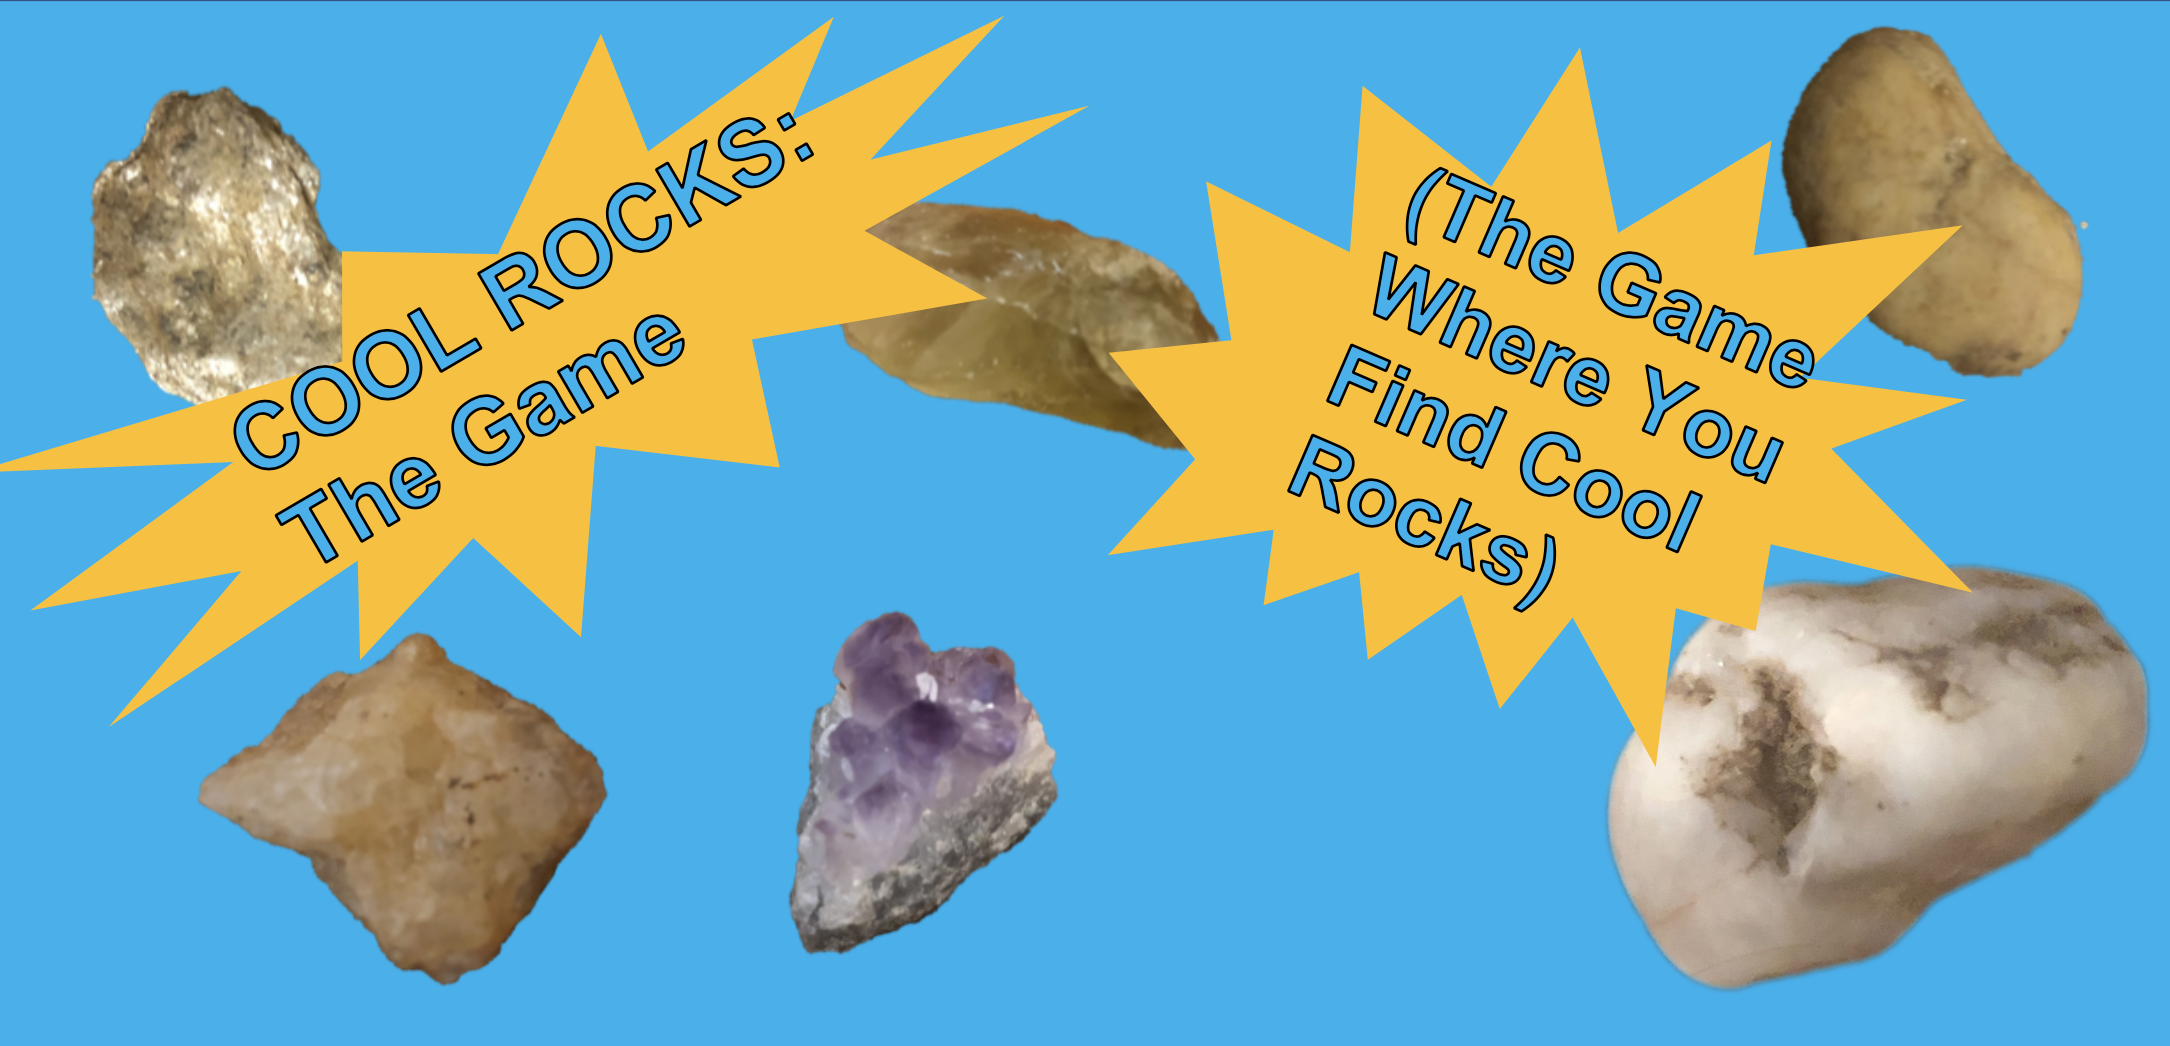 Cool Rocks: The Game (The Game Where You Find Cool Rocks)